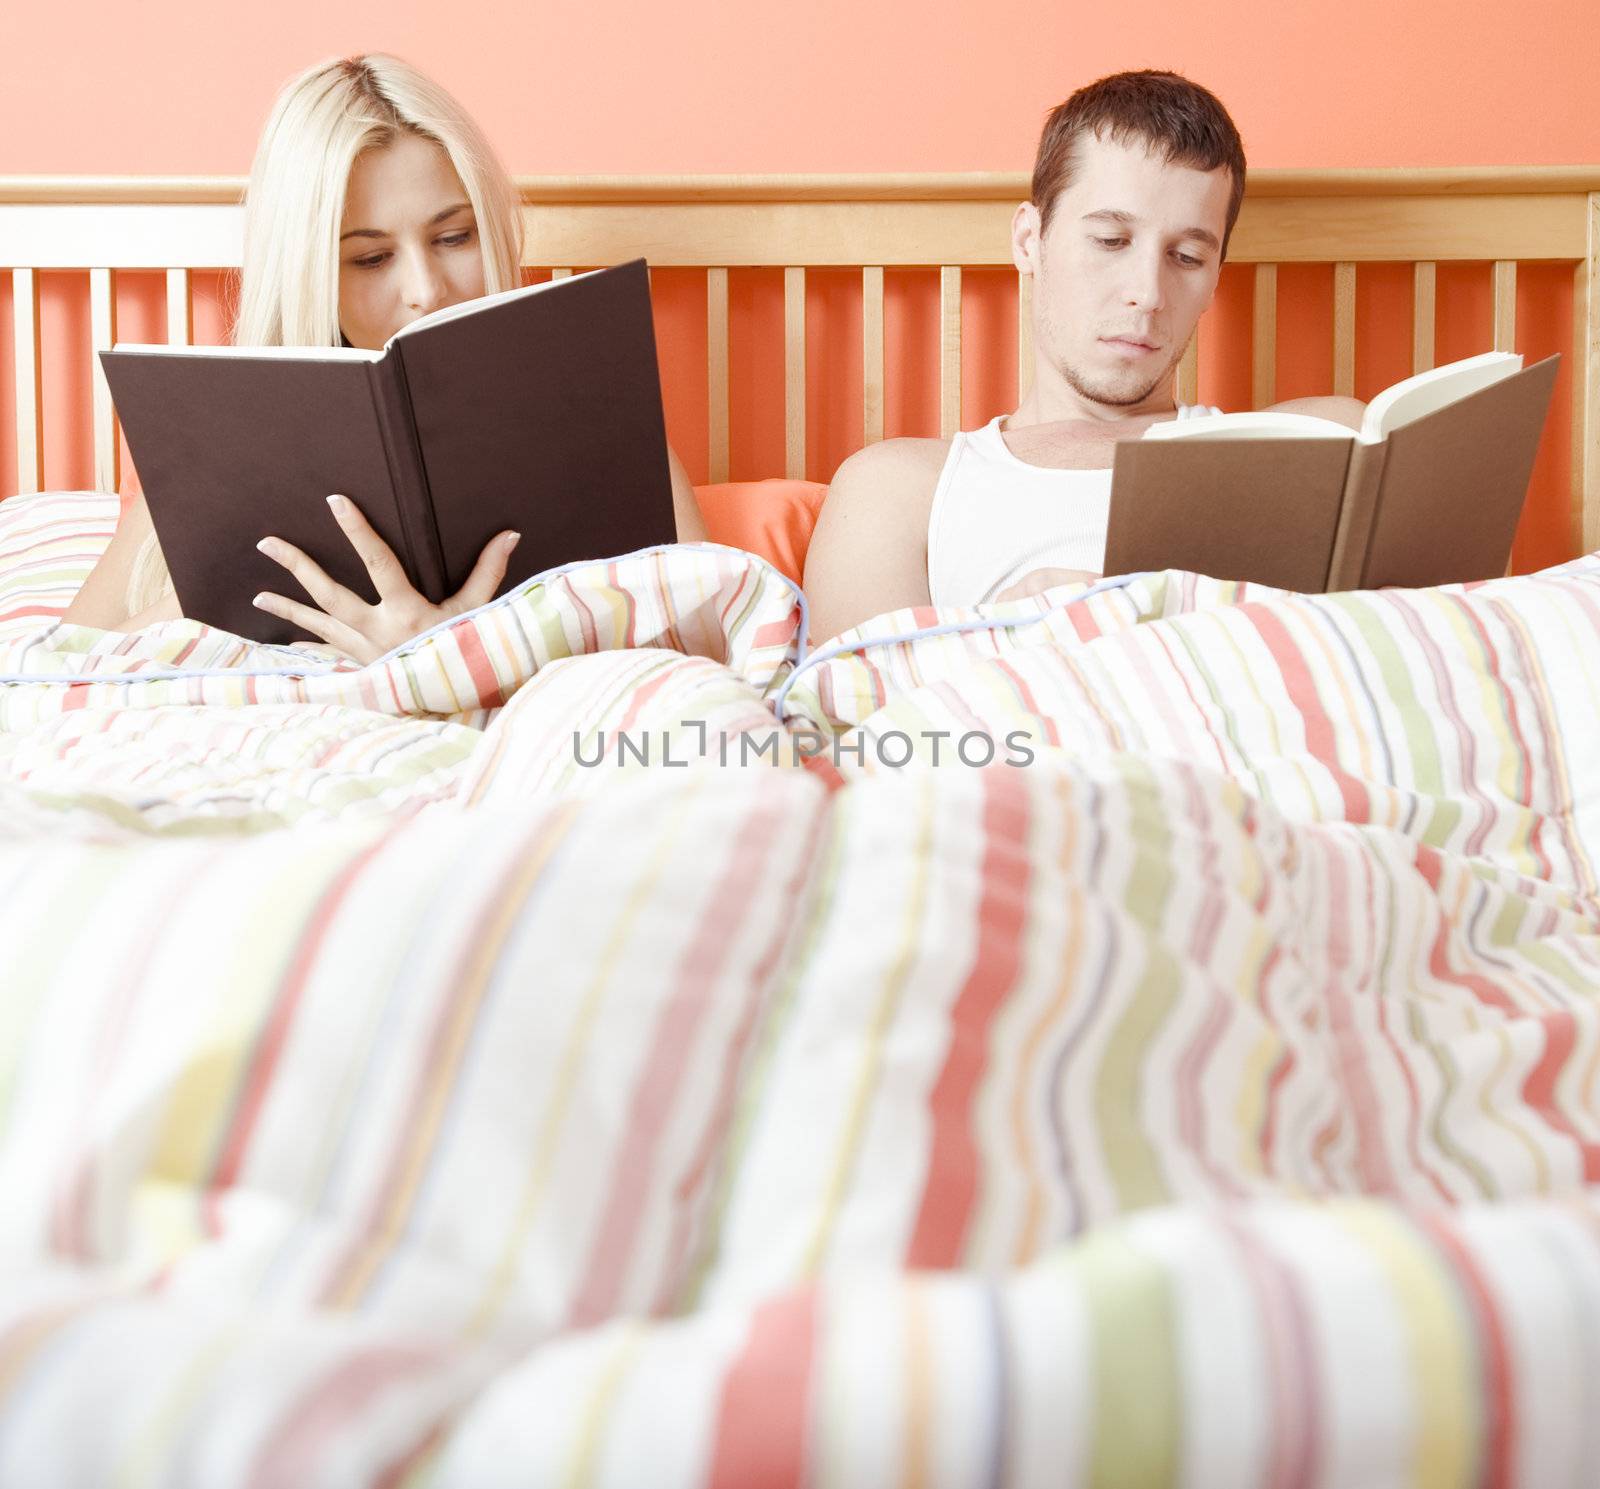 Man and woman reading side-by-side in bed. Square format.